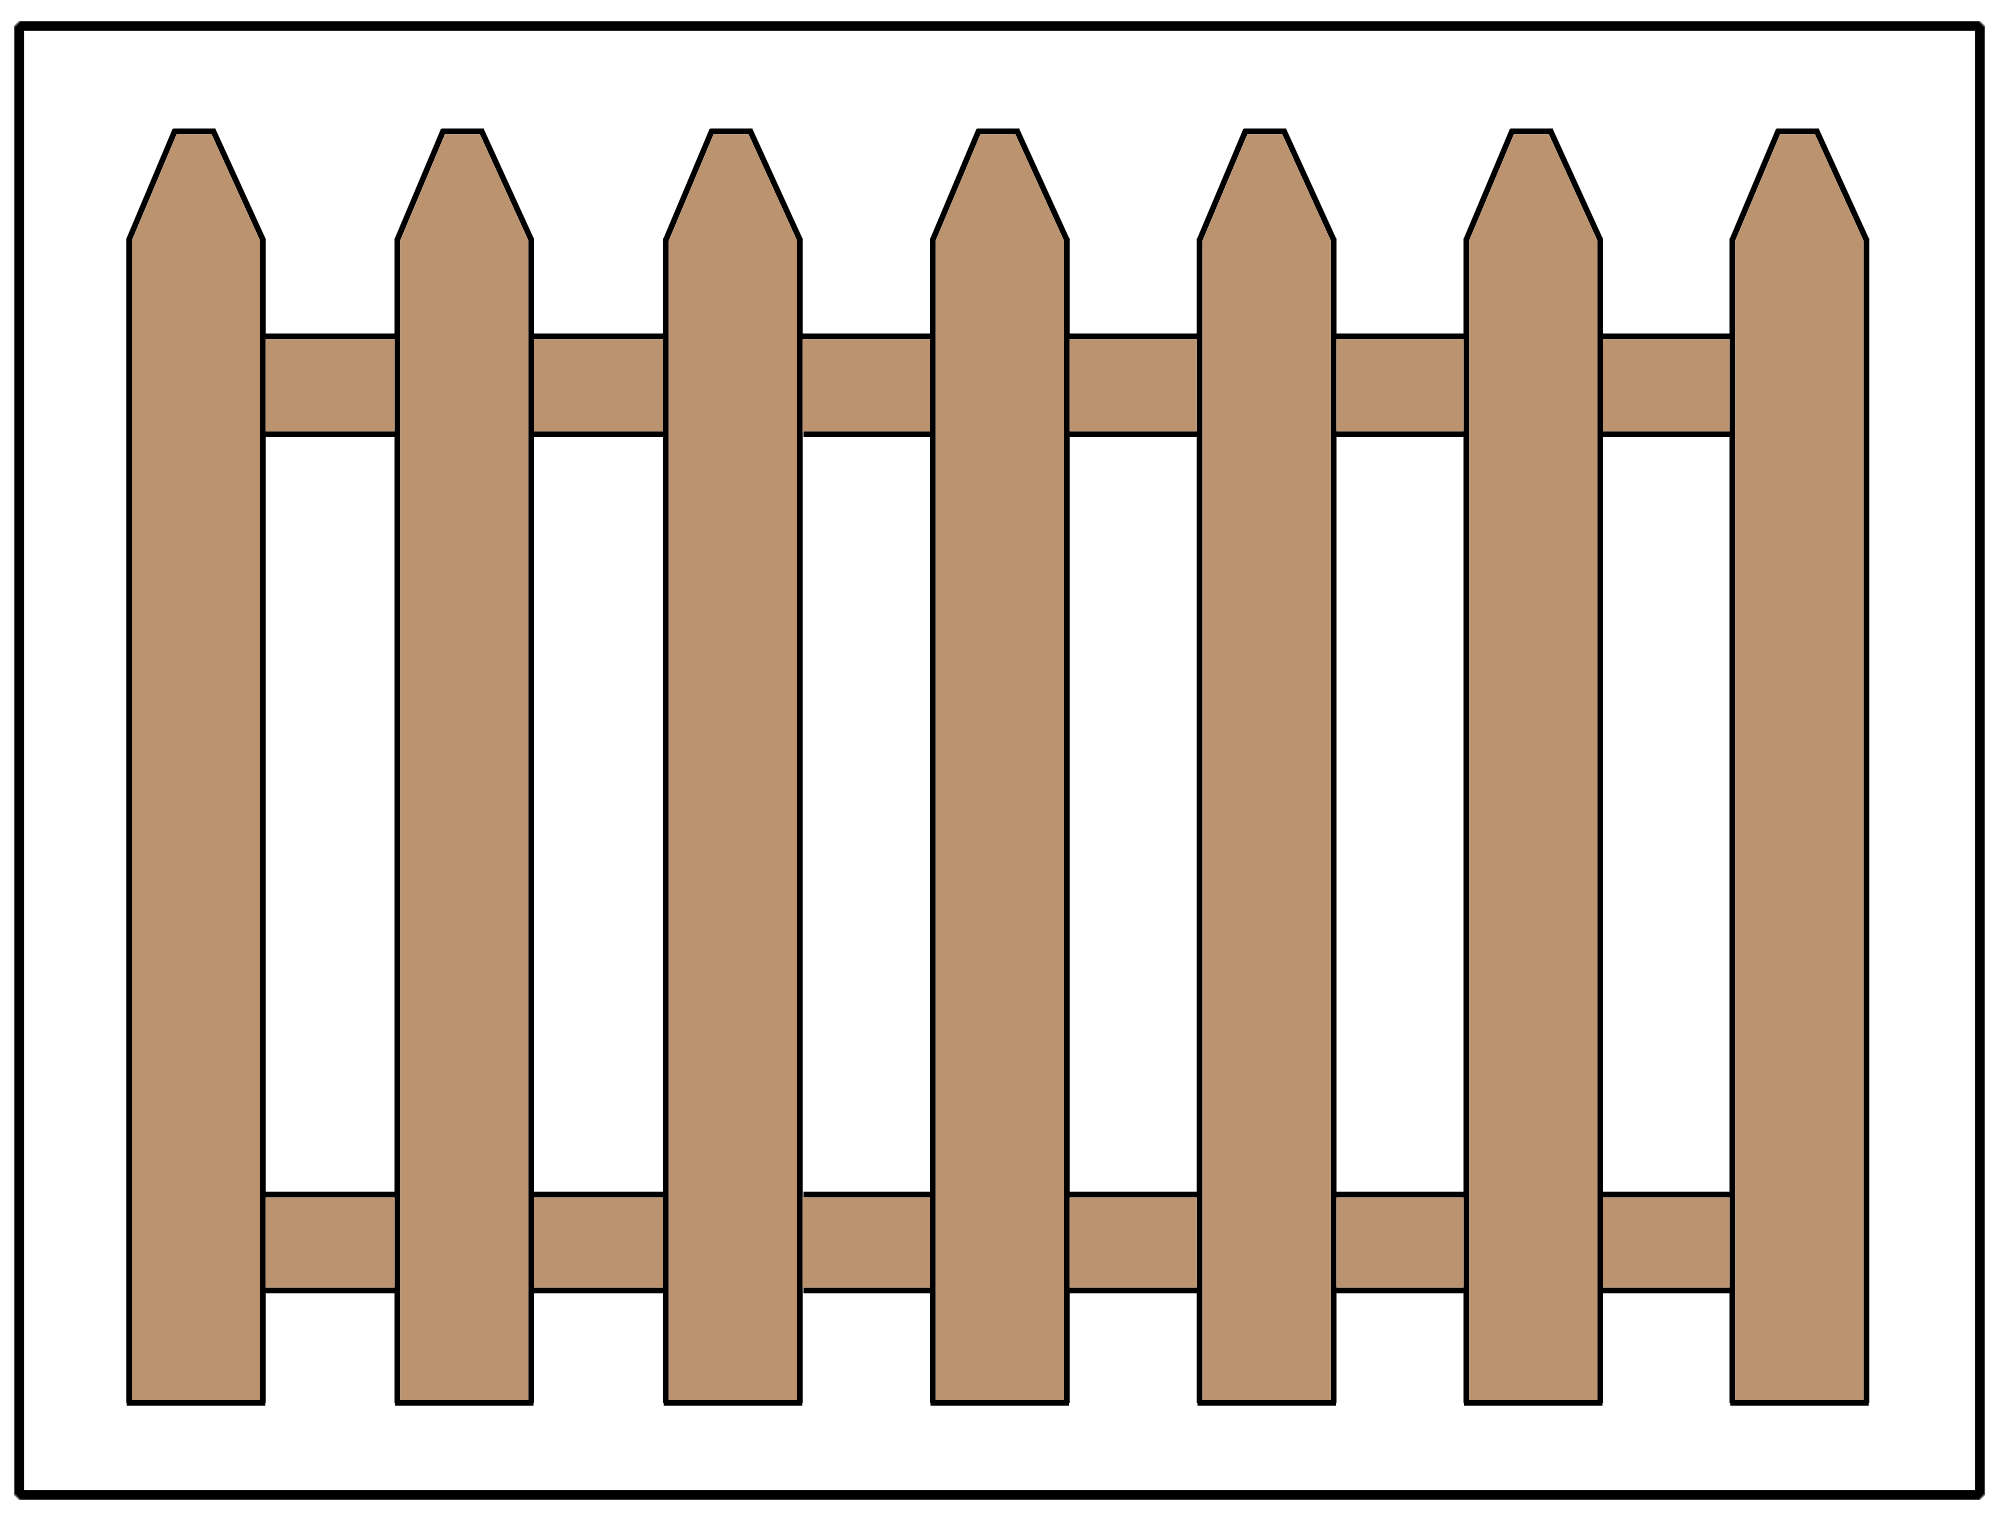 Illustration of a picket fence design using angled pickets